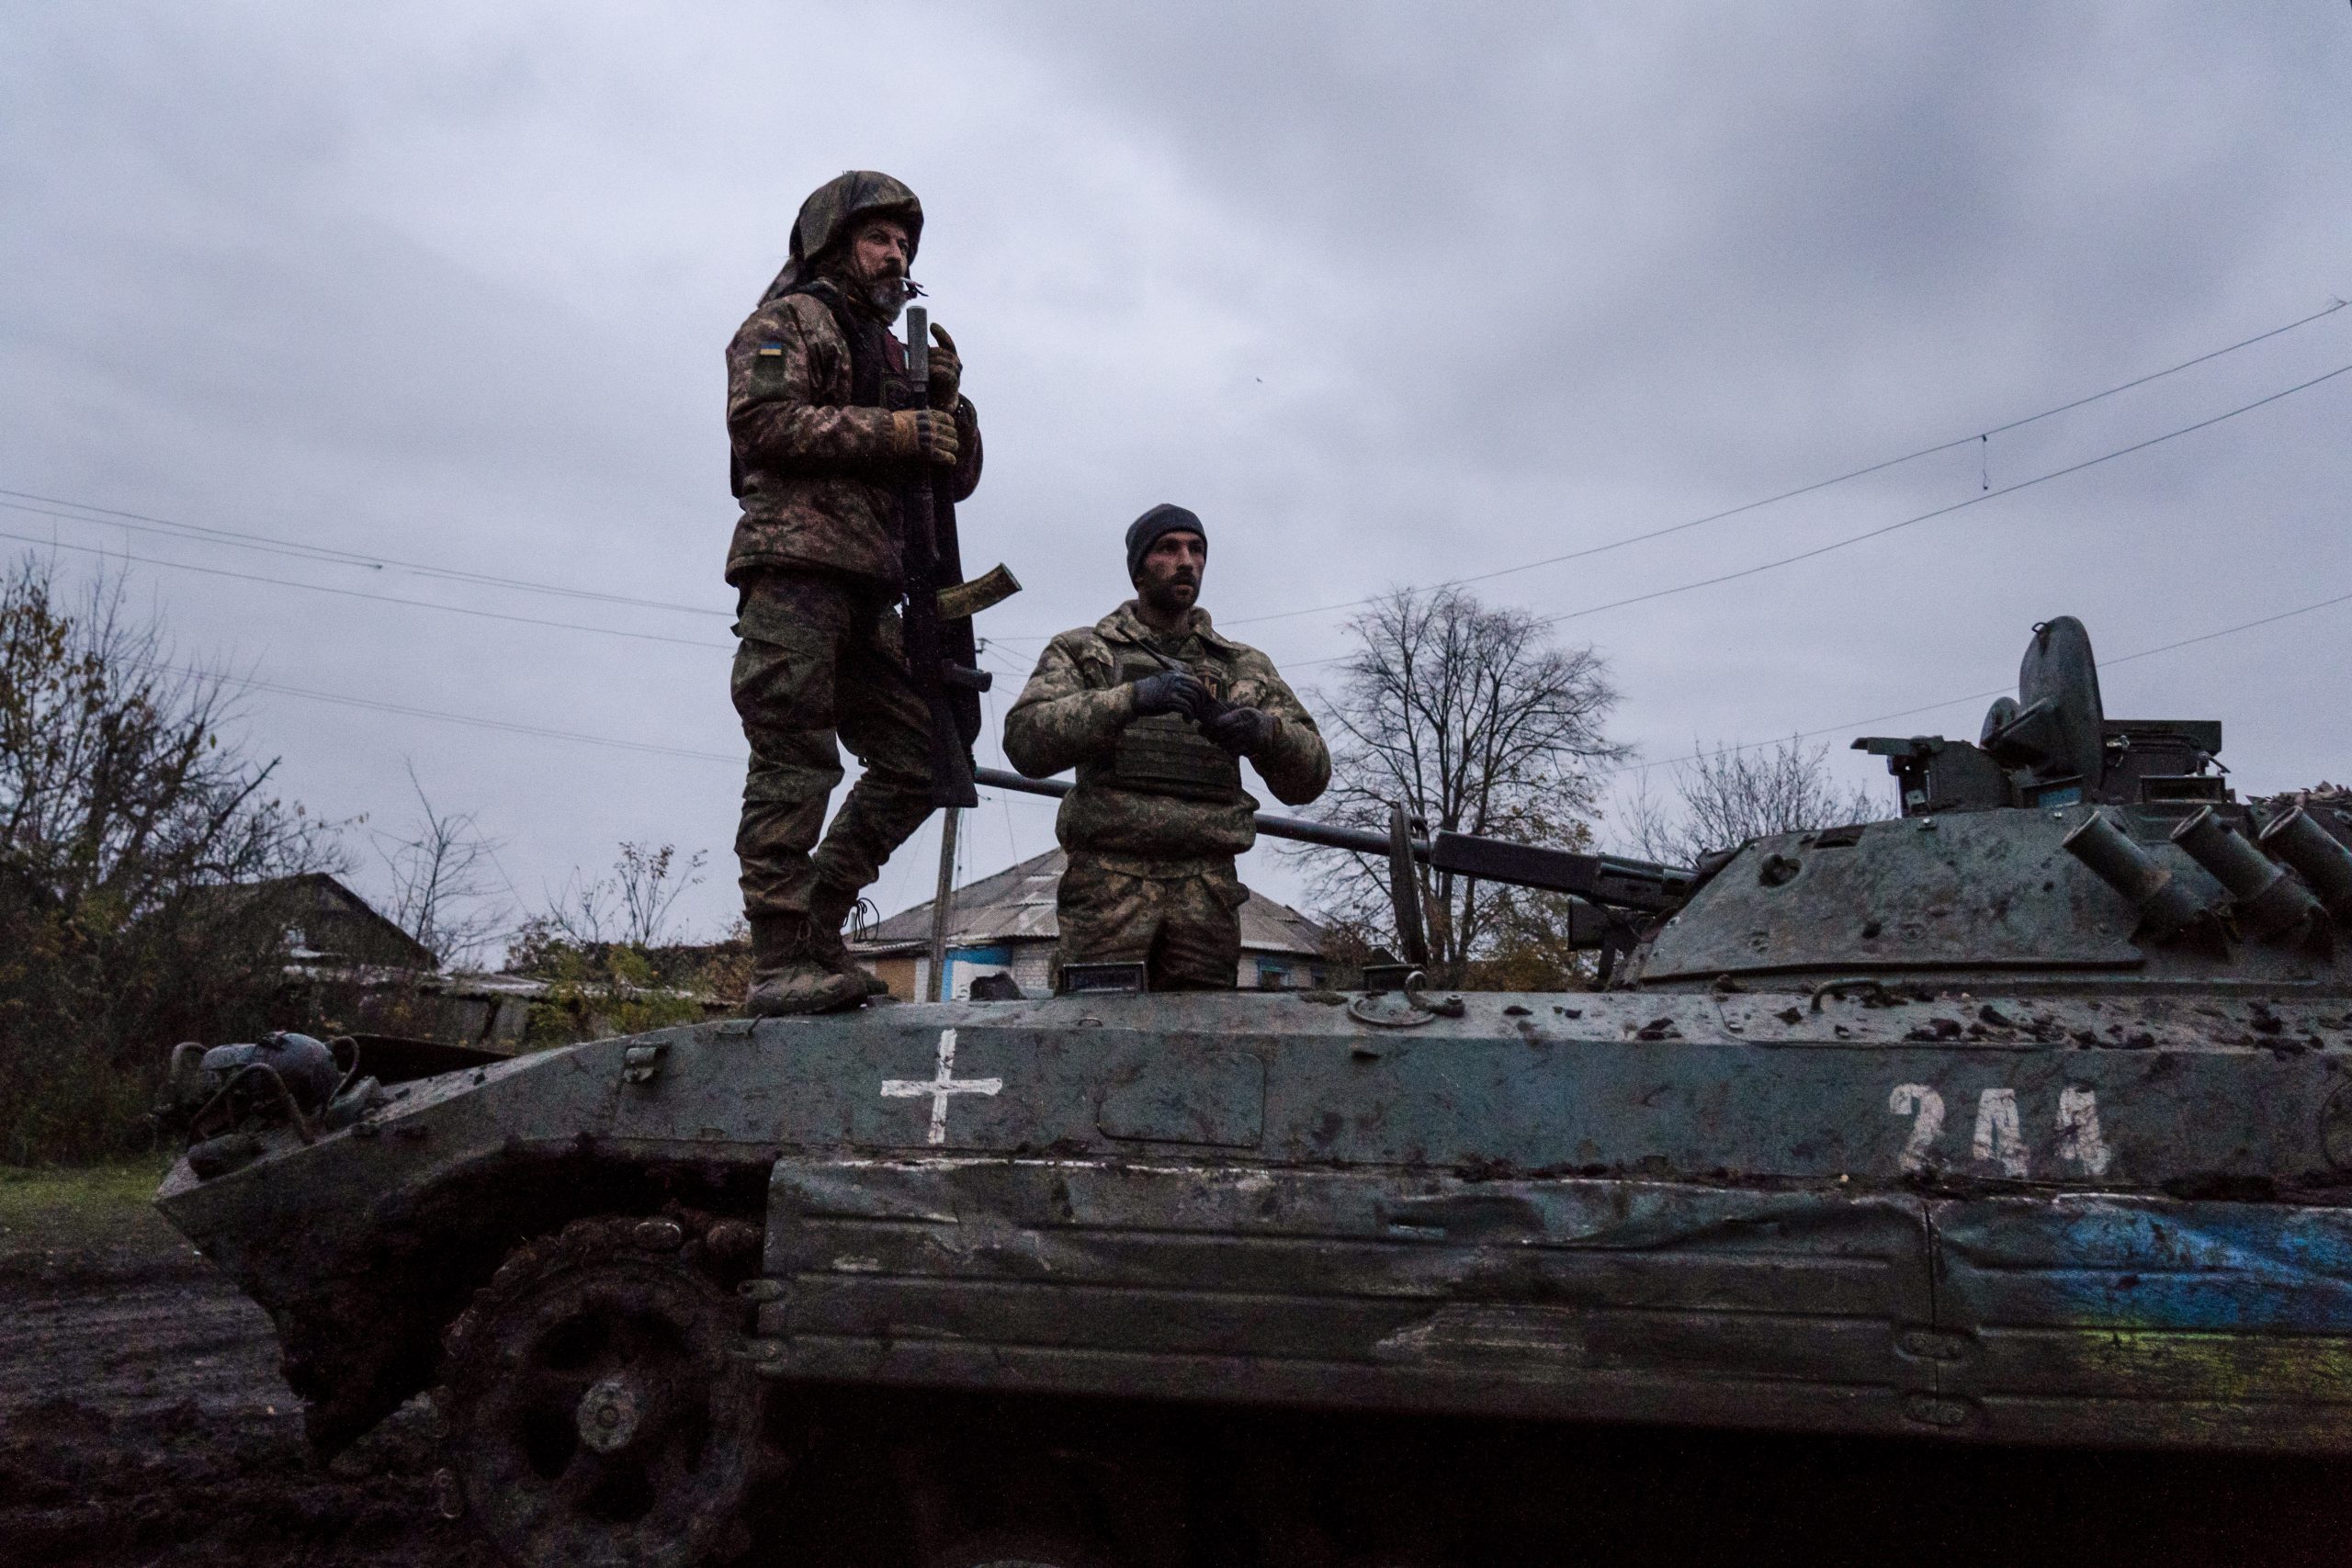 Photo: Paramedics and soldiers seen on an armored personnel carrier. Ukrainian troops continue their counteroffensive operation in eastern Ukraine but face heavy resistance in the area of Svatove and Kreminna in the Luhansk region. The Svatove-Kreminna road is a key supply route for Russian troops in the Luhansk region. Credit: Photo by Ashley Chan / SOPA Images/Sipa USA